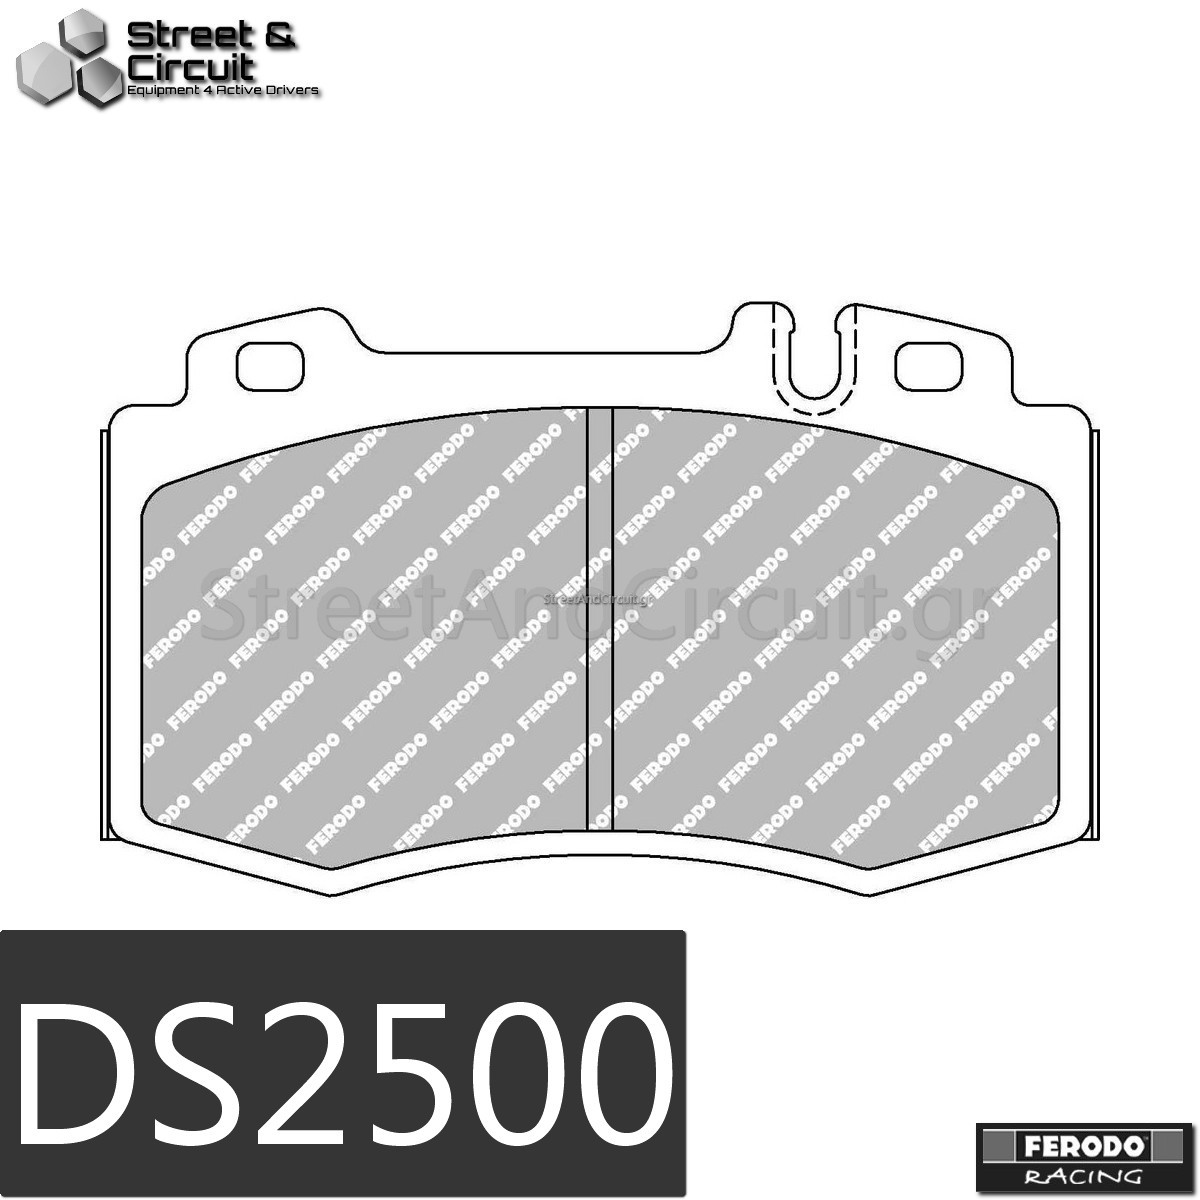 2.7 CDi 20v (S211 ) E270 2002-2009 (FRONT), Brake System: BREMBO - Ferodo Racing Τακάκια *DS2500*